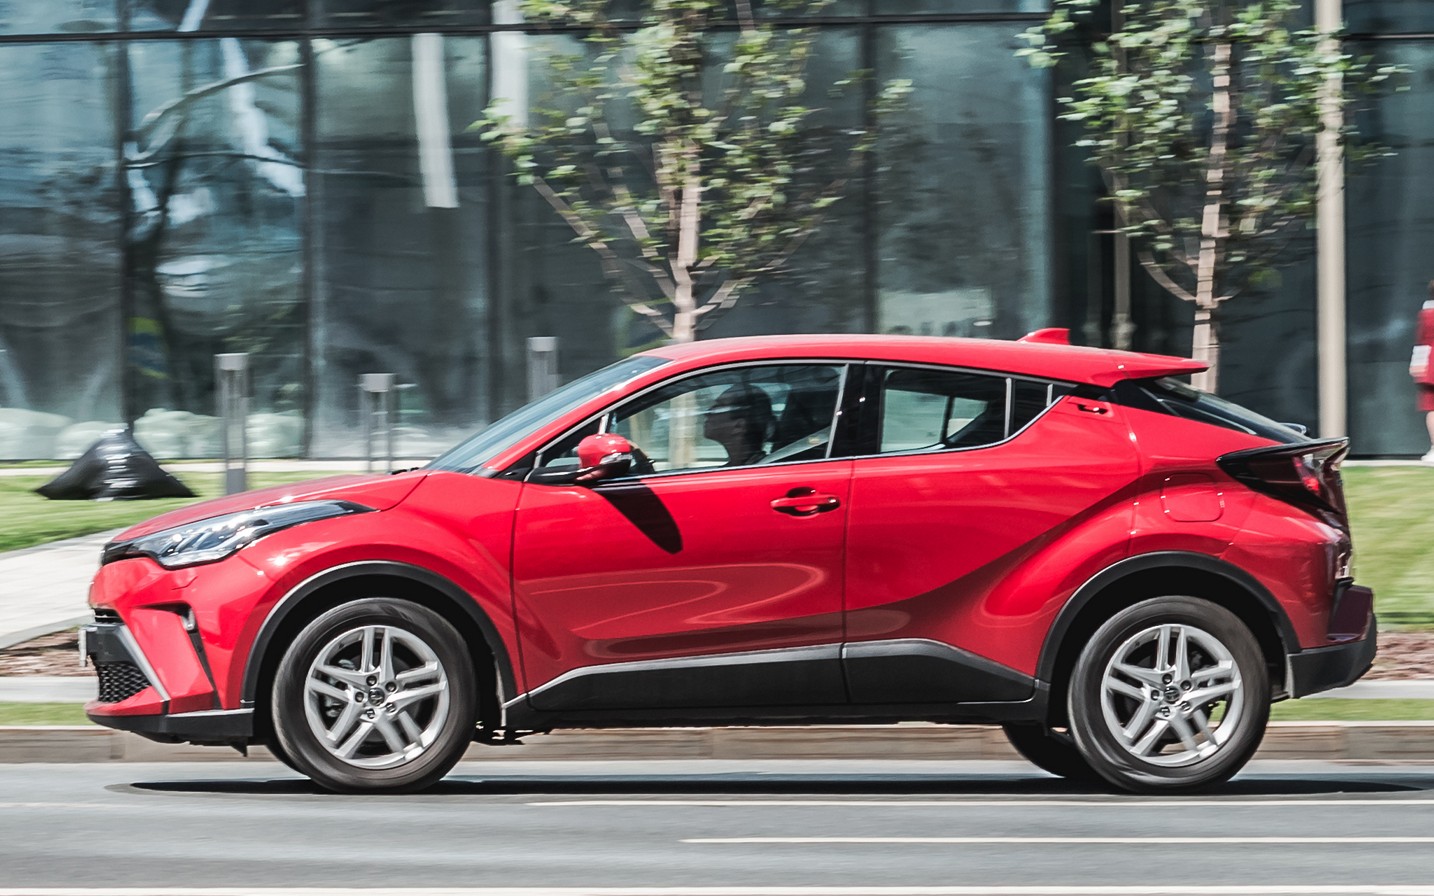 Toyota C-HR 2018 Review